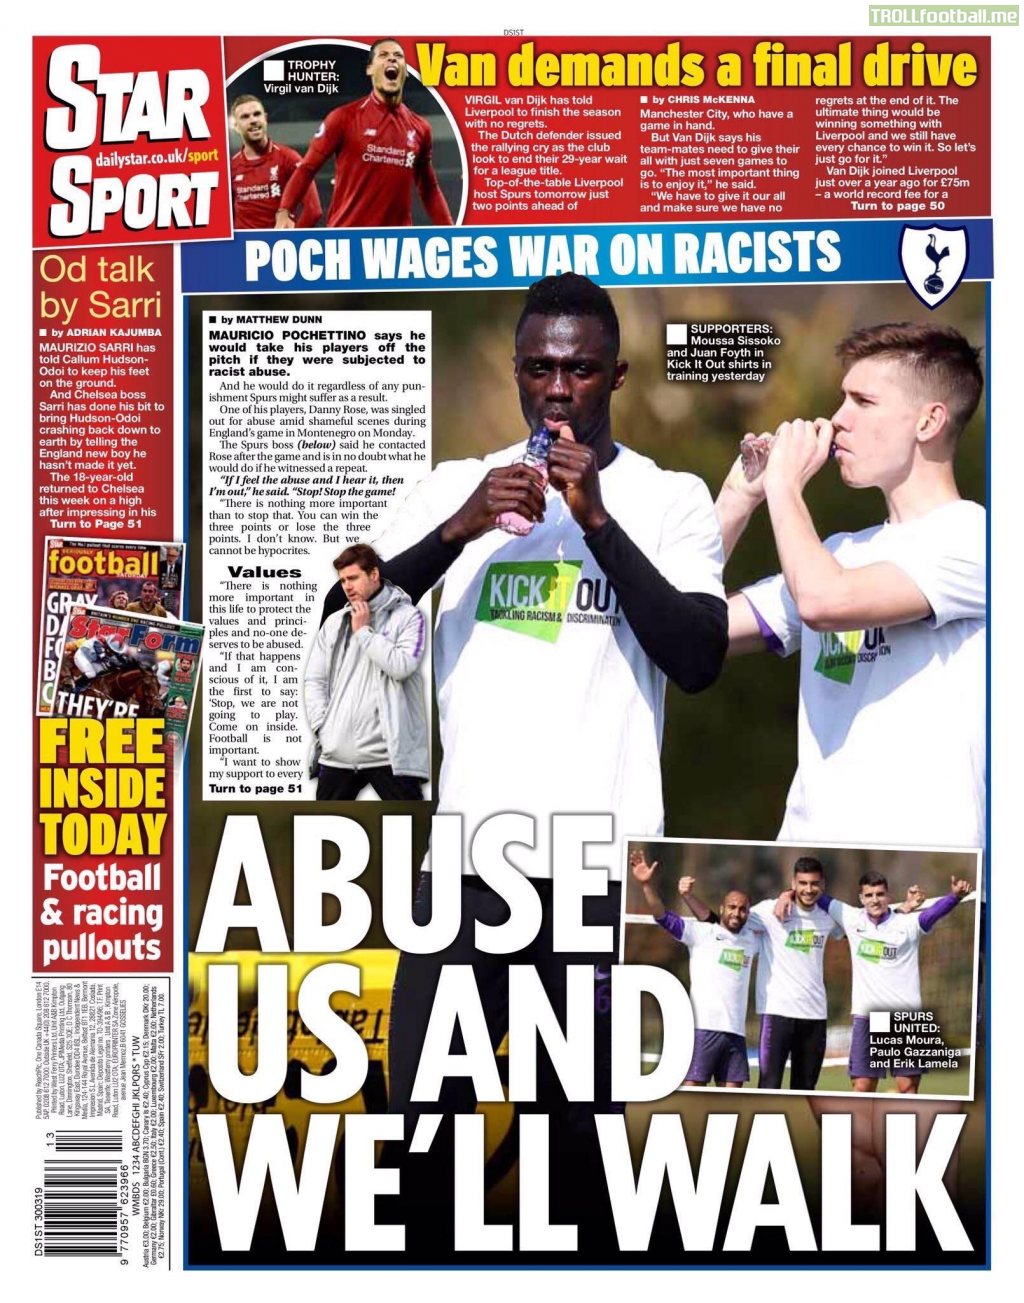 The Star: “Poch wages war on racists.” Except.. that’s not Sissoko